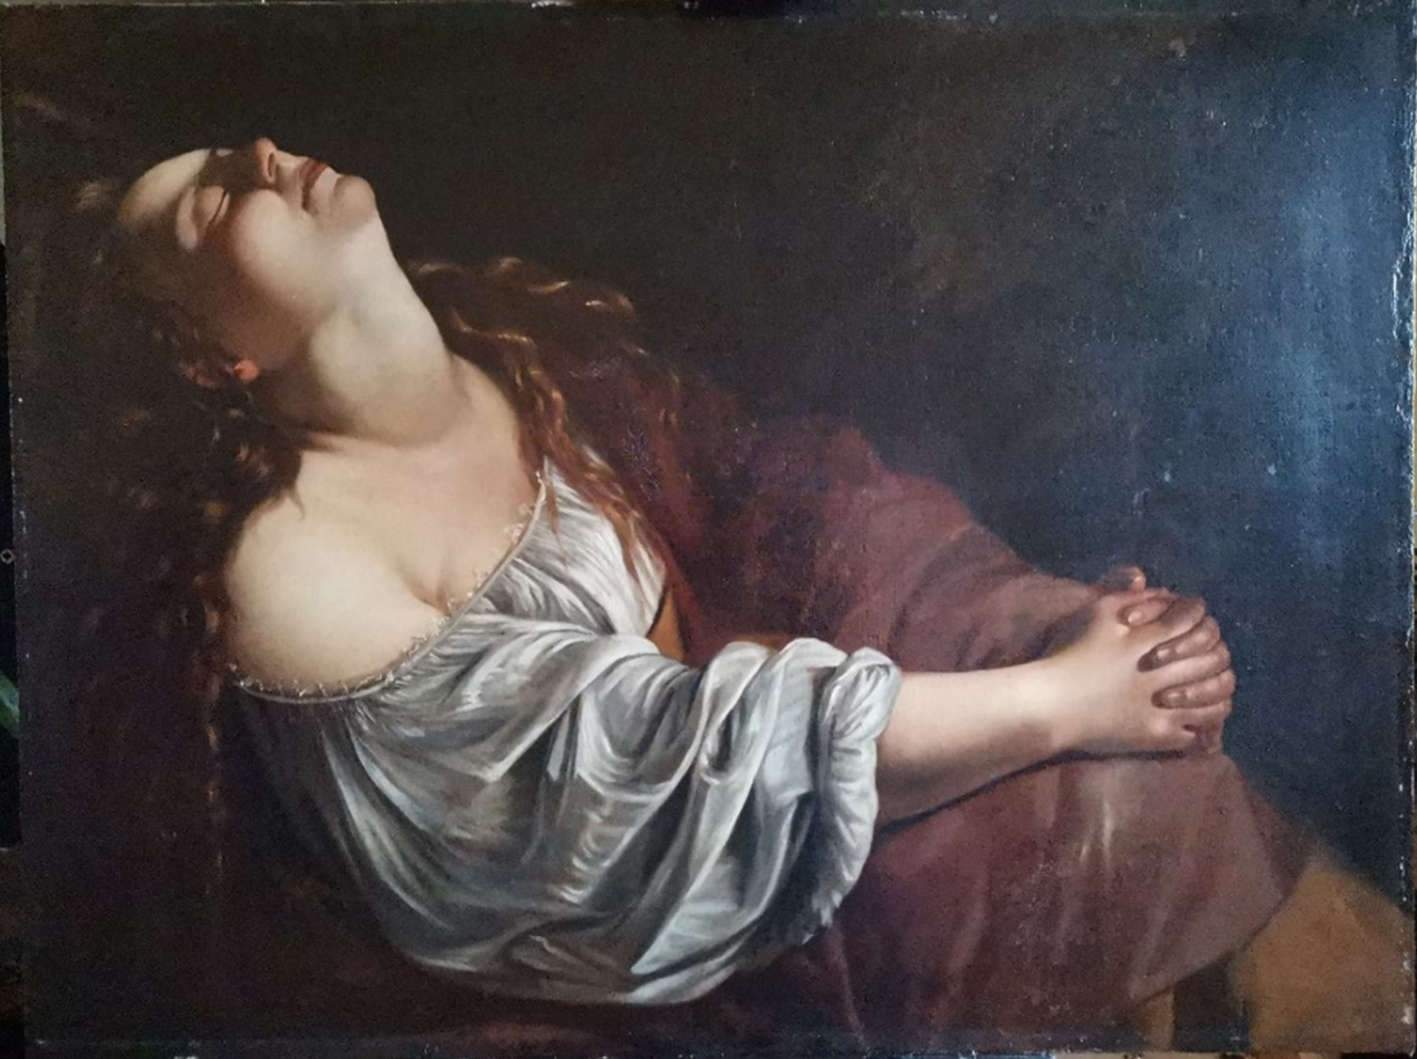 New work by Artemisia Gentileschi discovered? What the scholar says